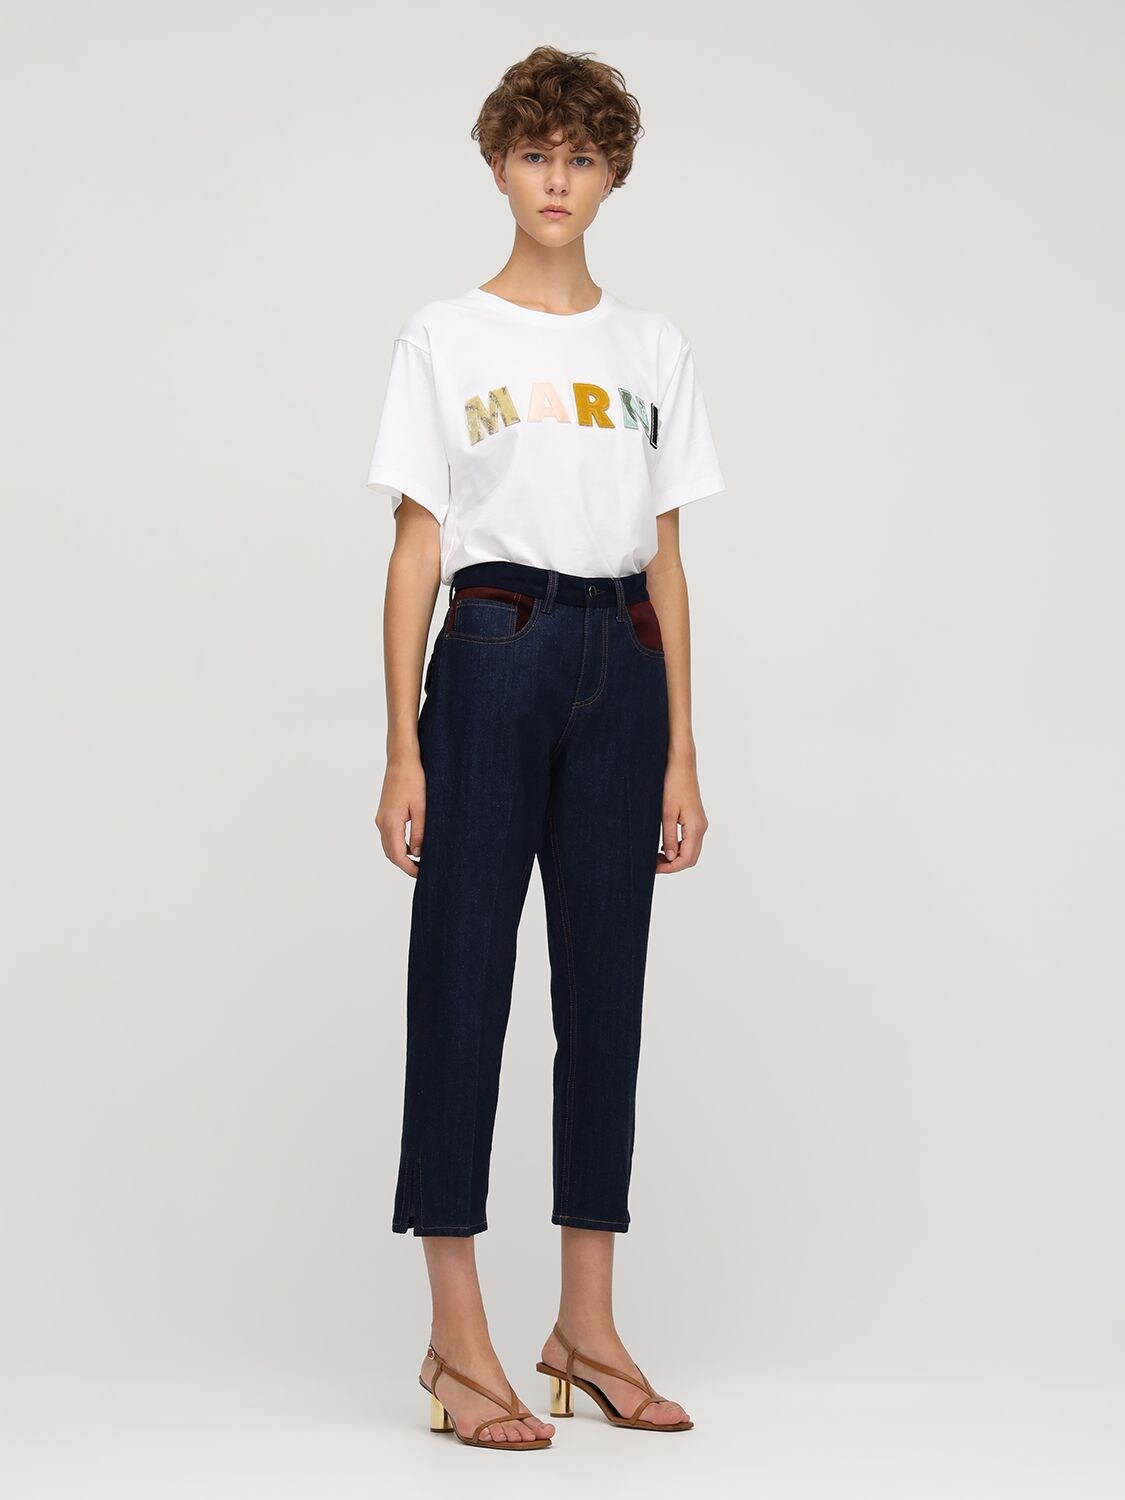 Marni Denim Straight Jeans W/ Suede & Leather In Blue,multi